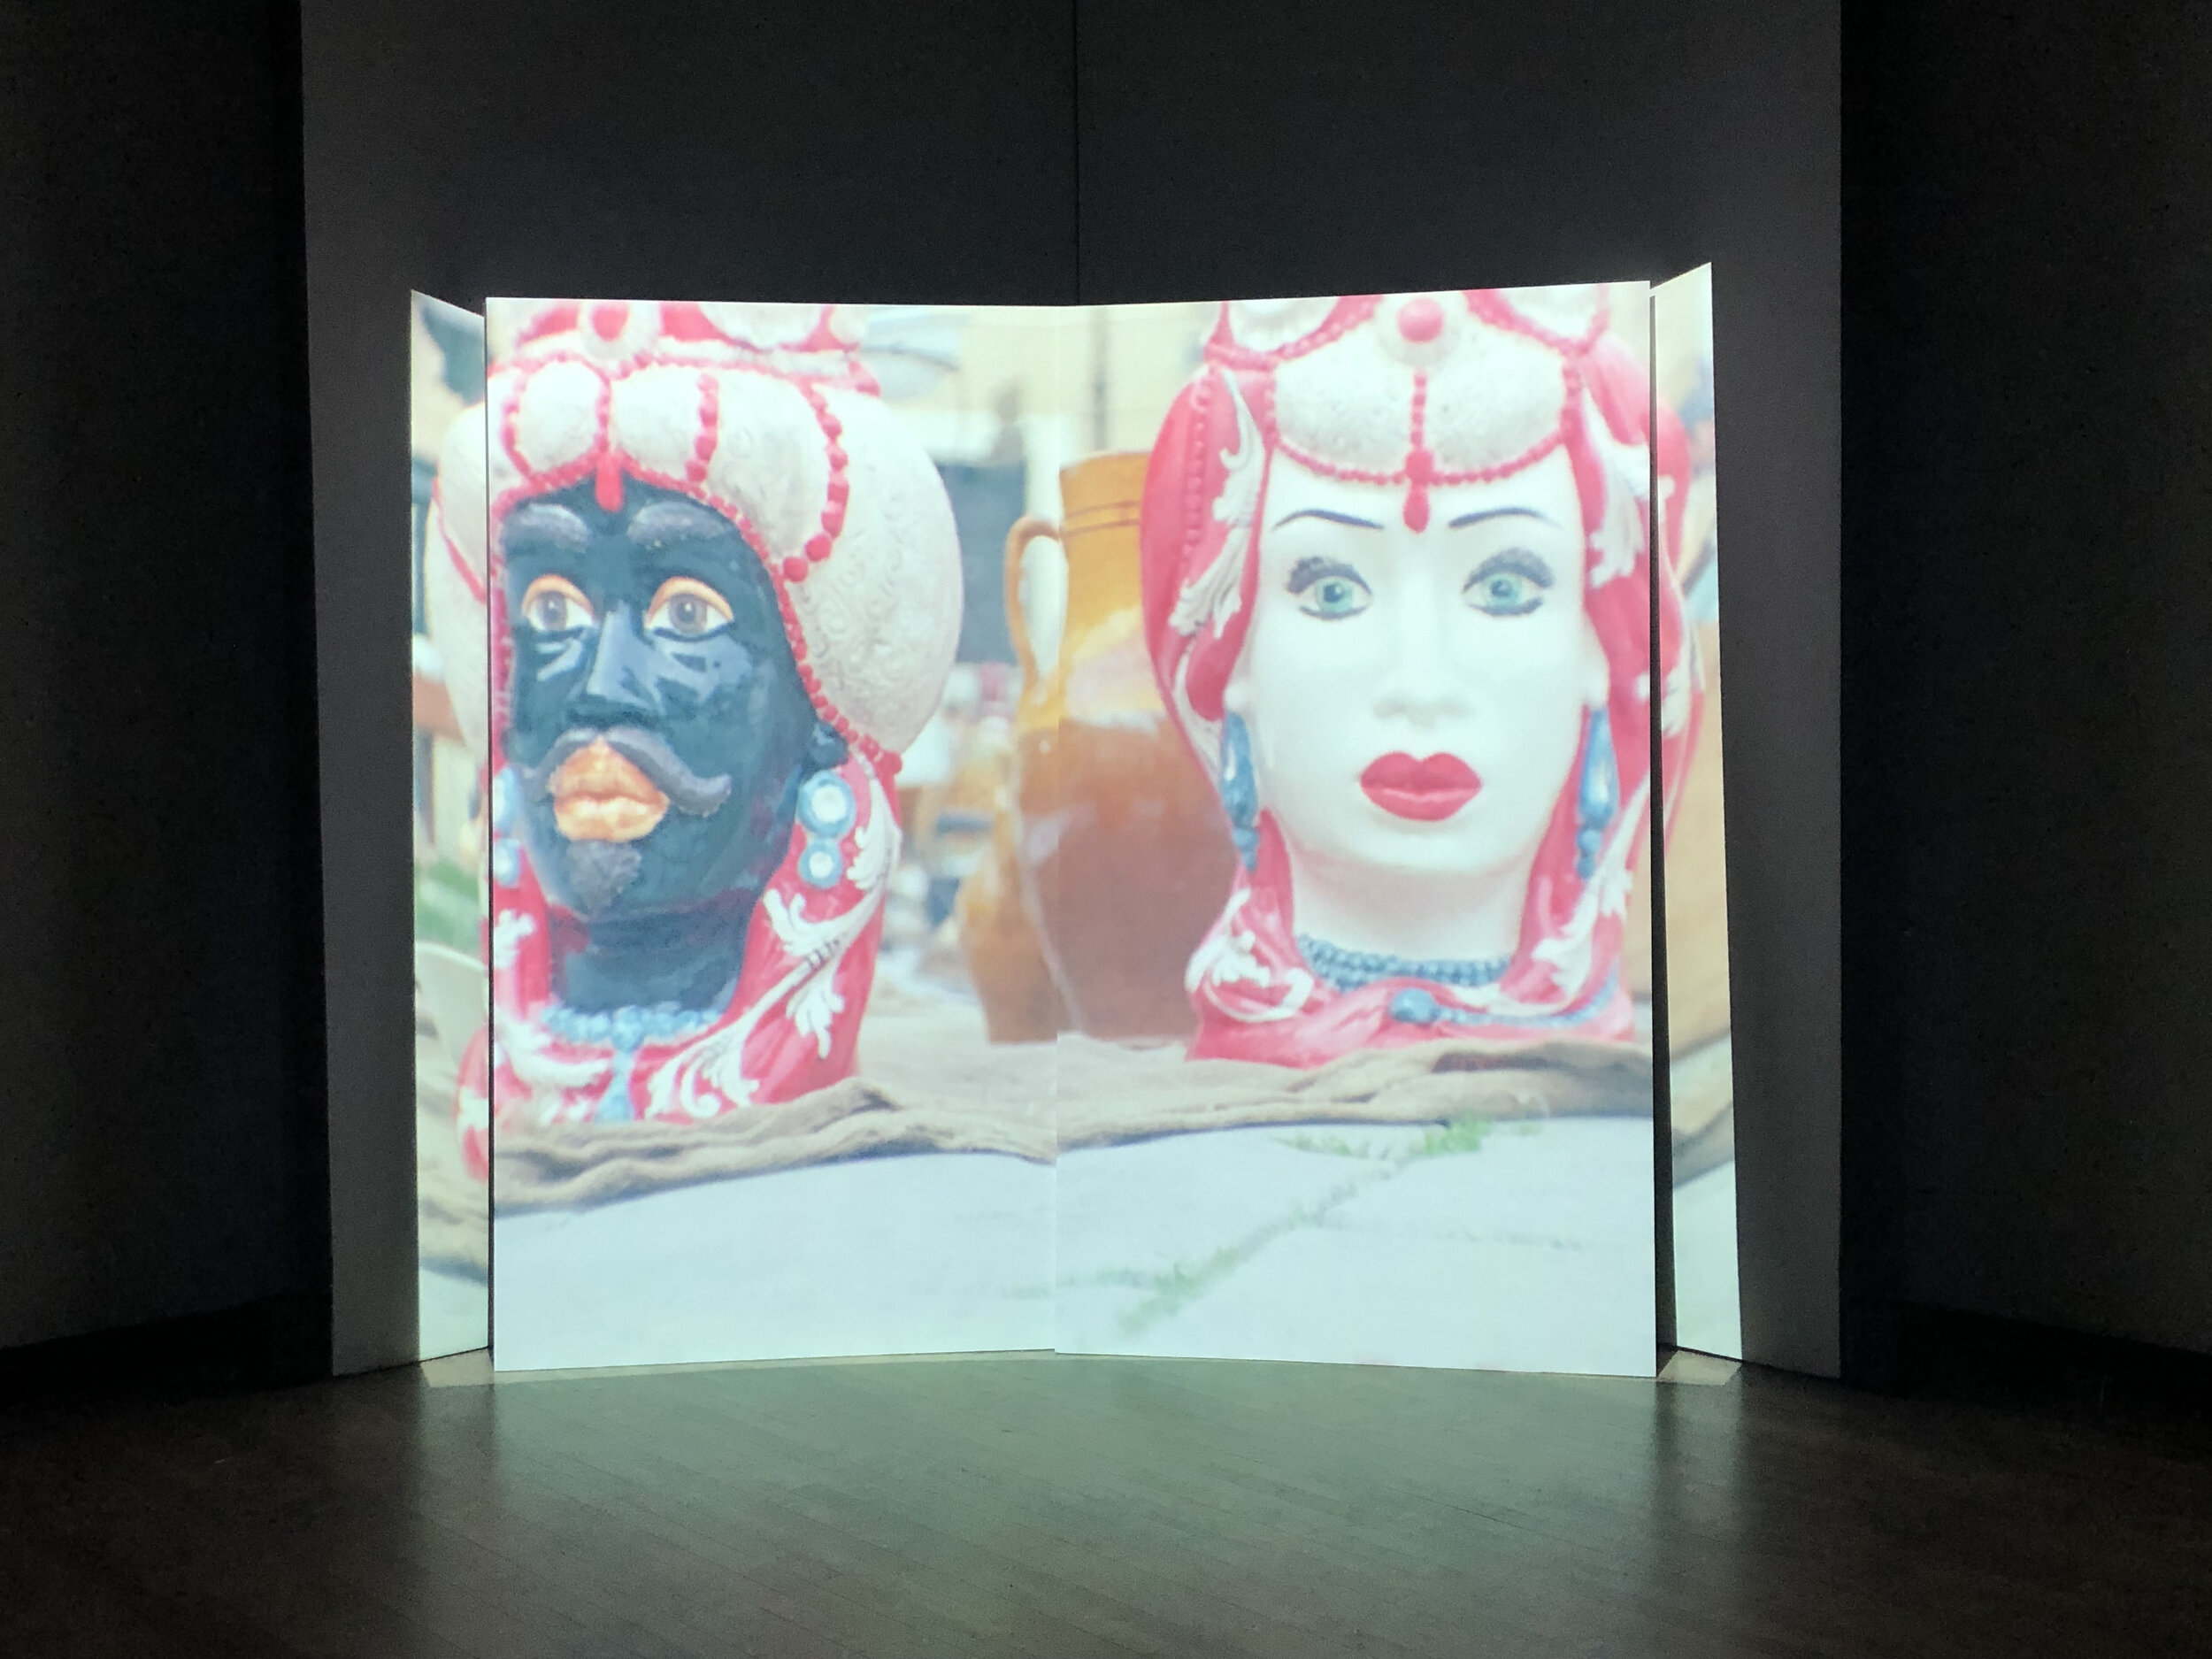  installation view at the Rubenstein Arts gallery. projection onto a bifurcated screen.    